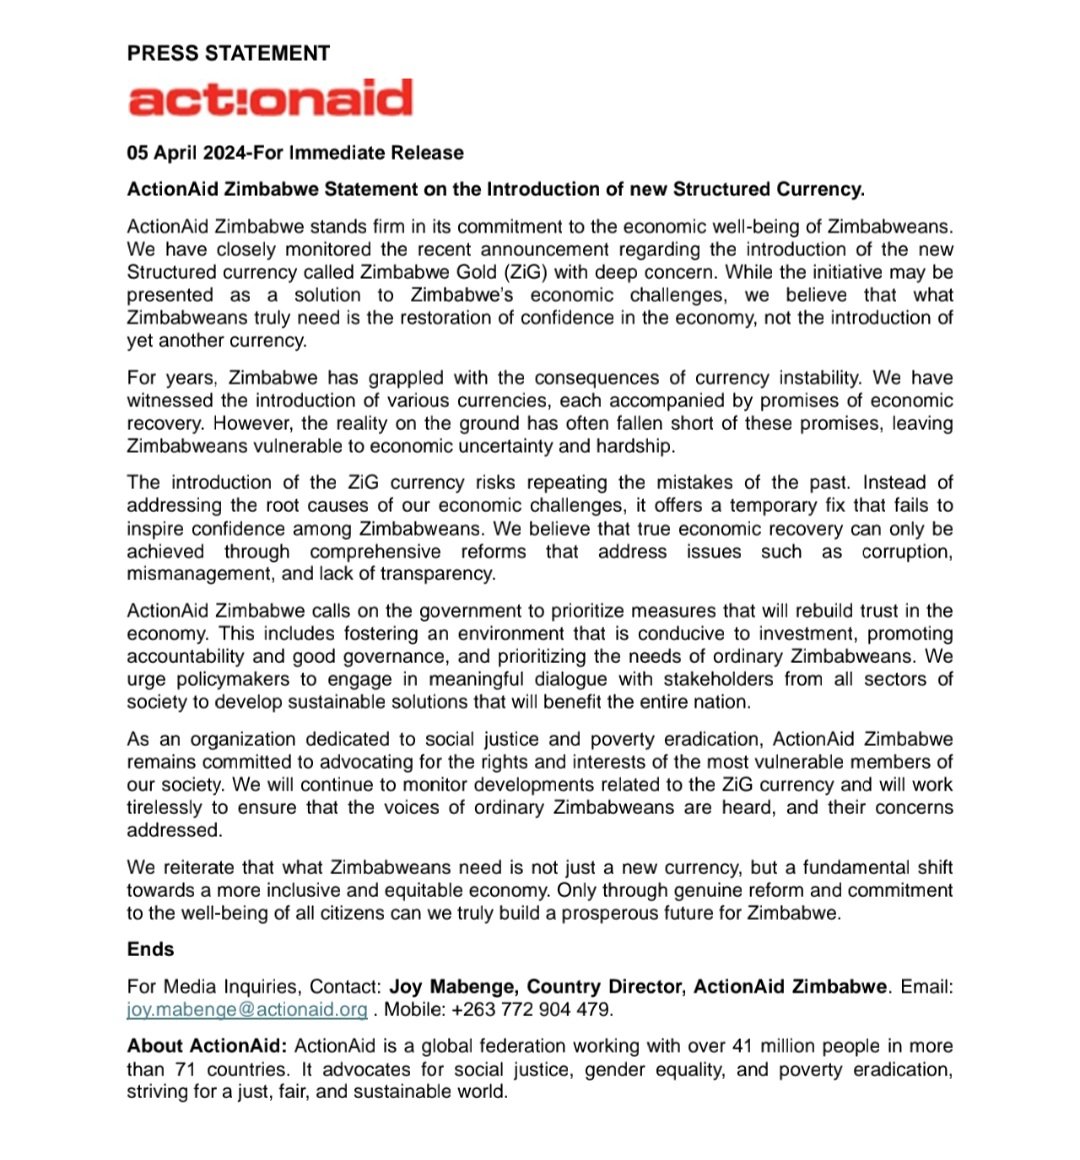 ActionAid Zimbabwe statement on the introduction of new structured currency.